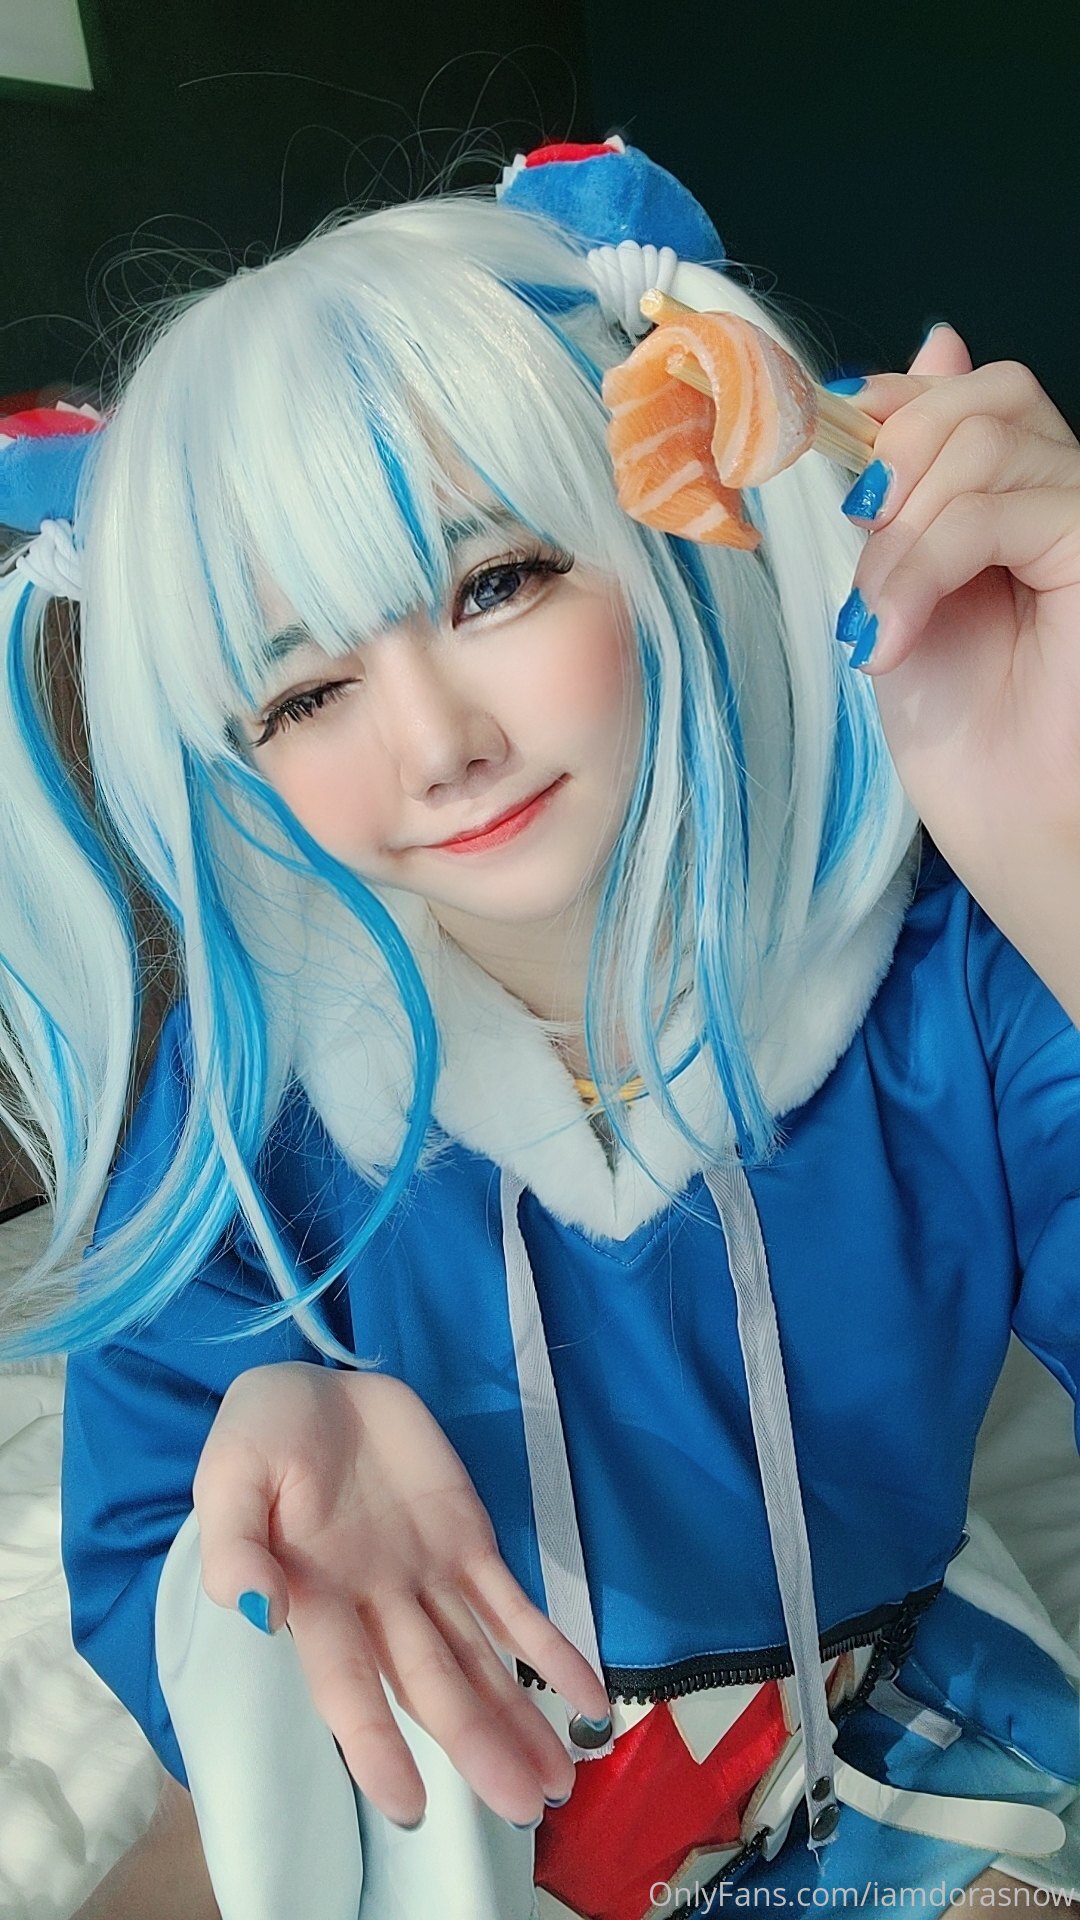 hololivecosplay